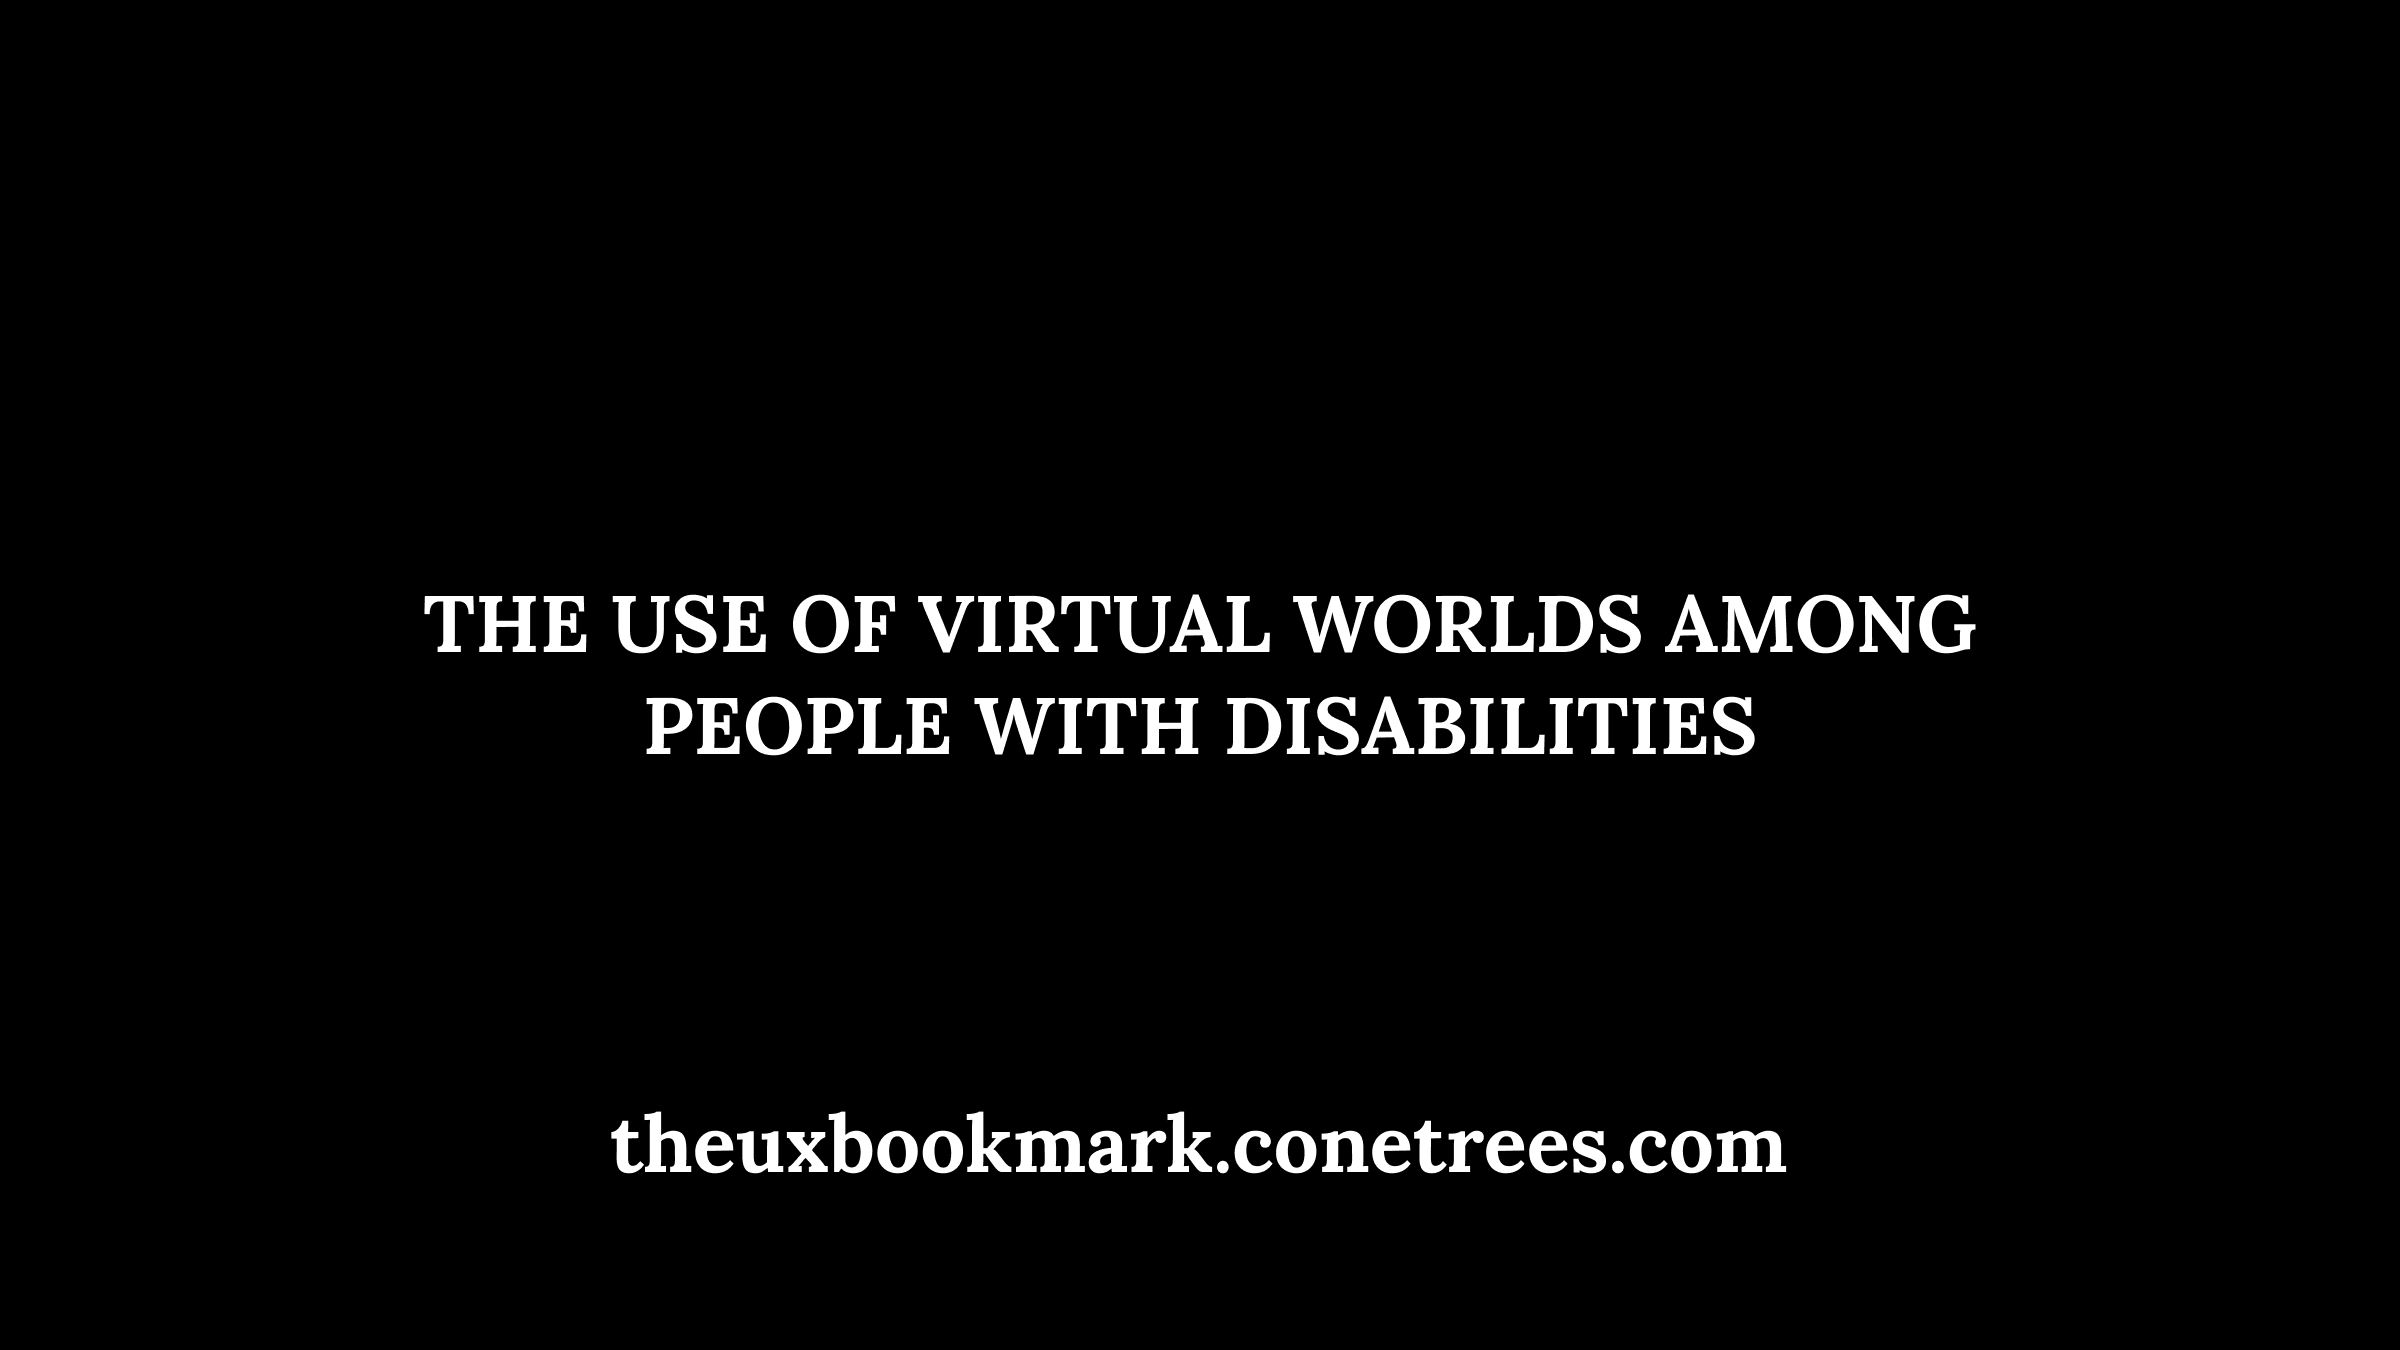 The Use of Virtual Worlds Among People with Disabilities